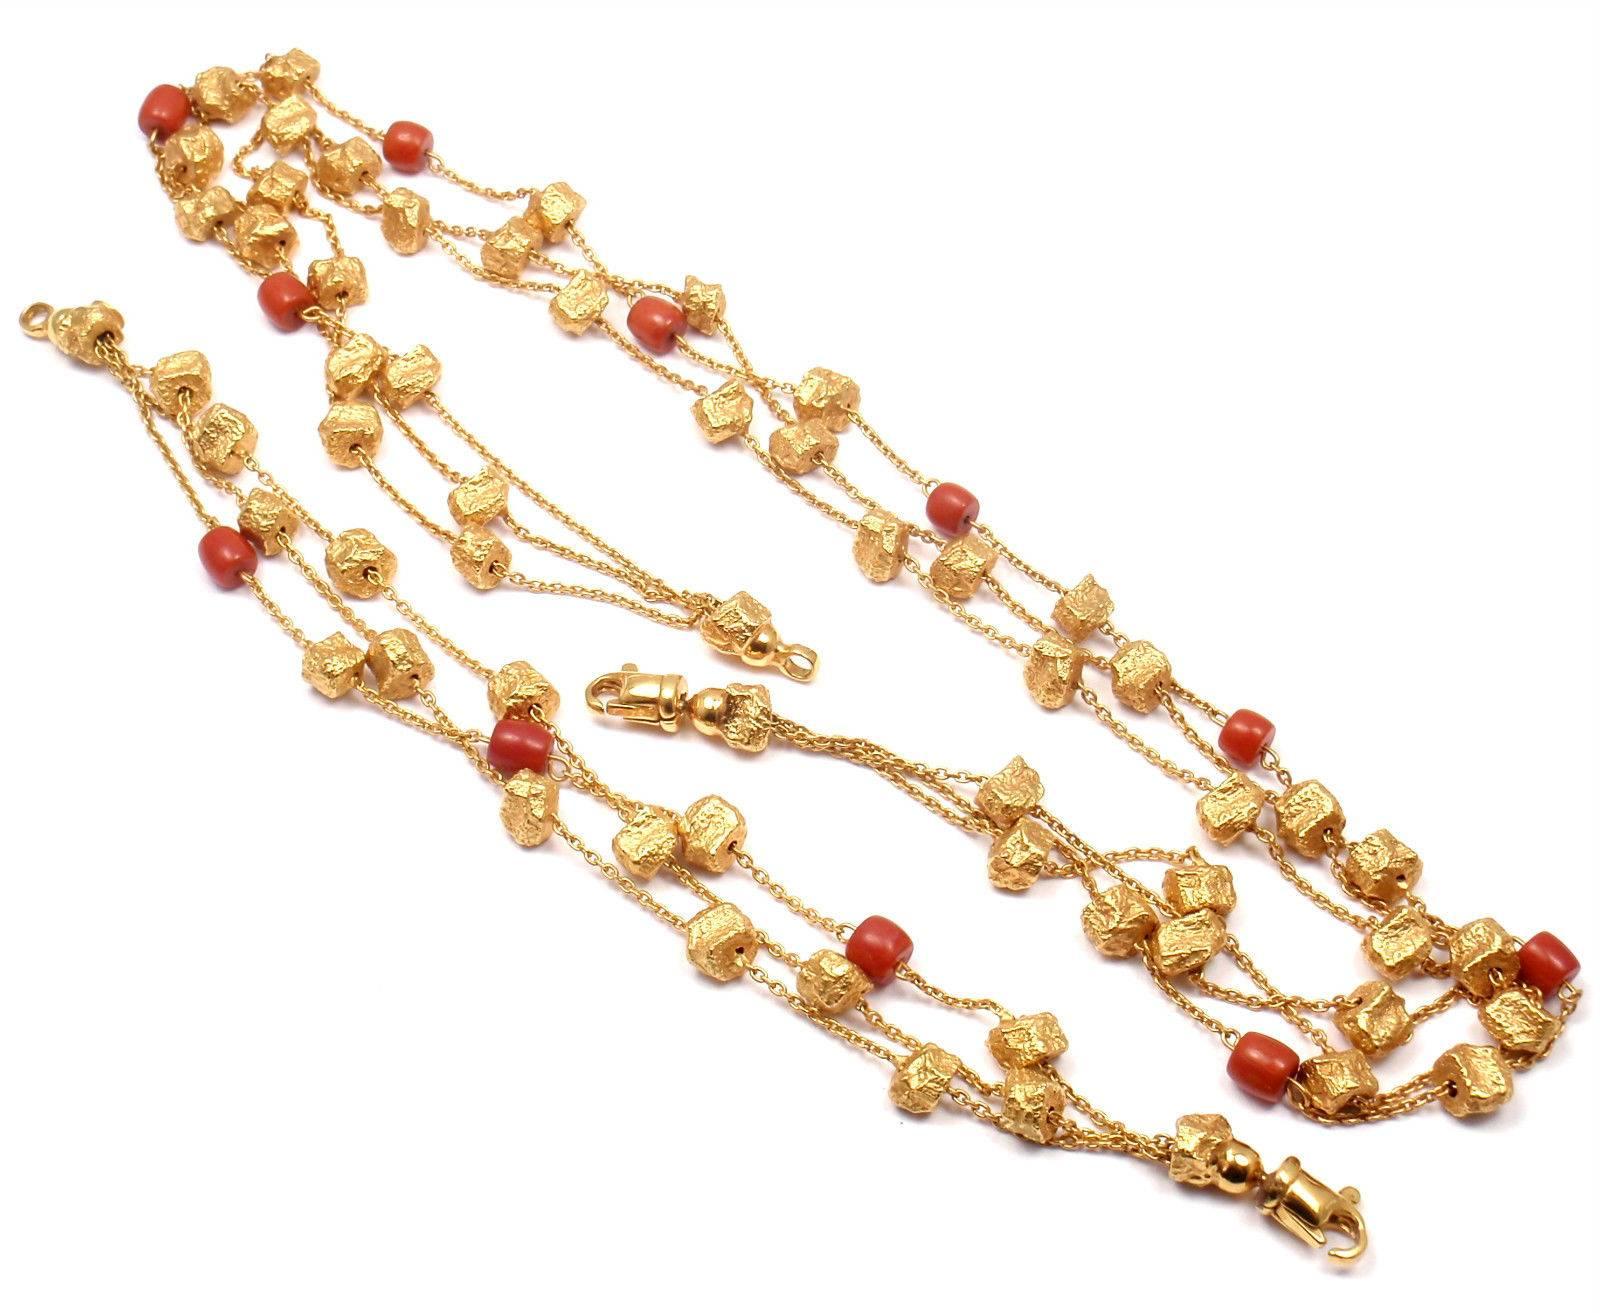 18k Yellow Gold And Coral Nuggets Set Of A Necklace And Bracelet by Roberto Coin.
With 11 coral nuggets.

Details: 
Length: Necklace: 18